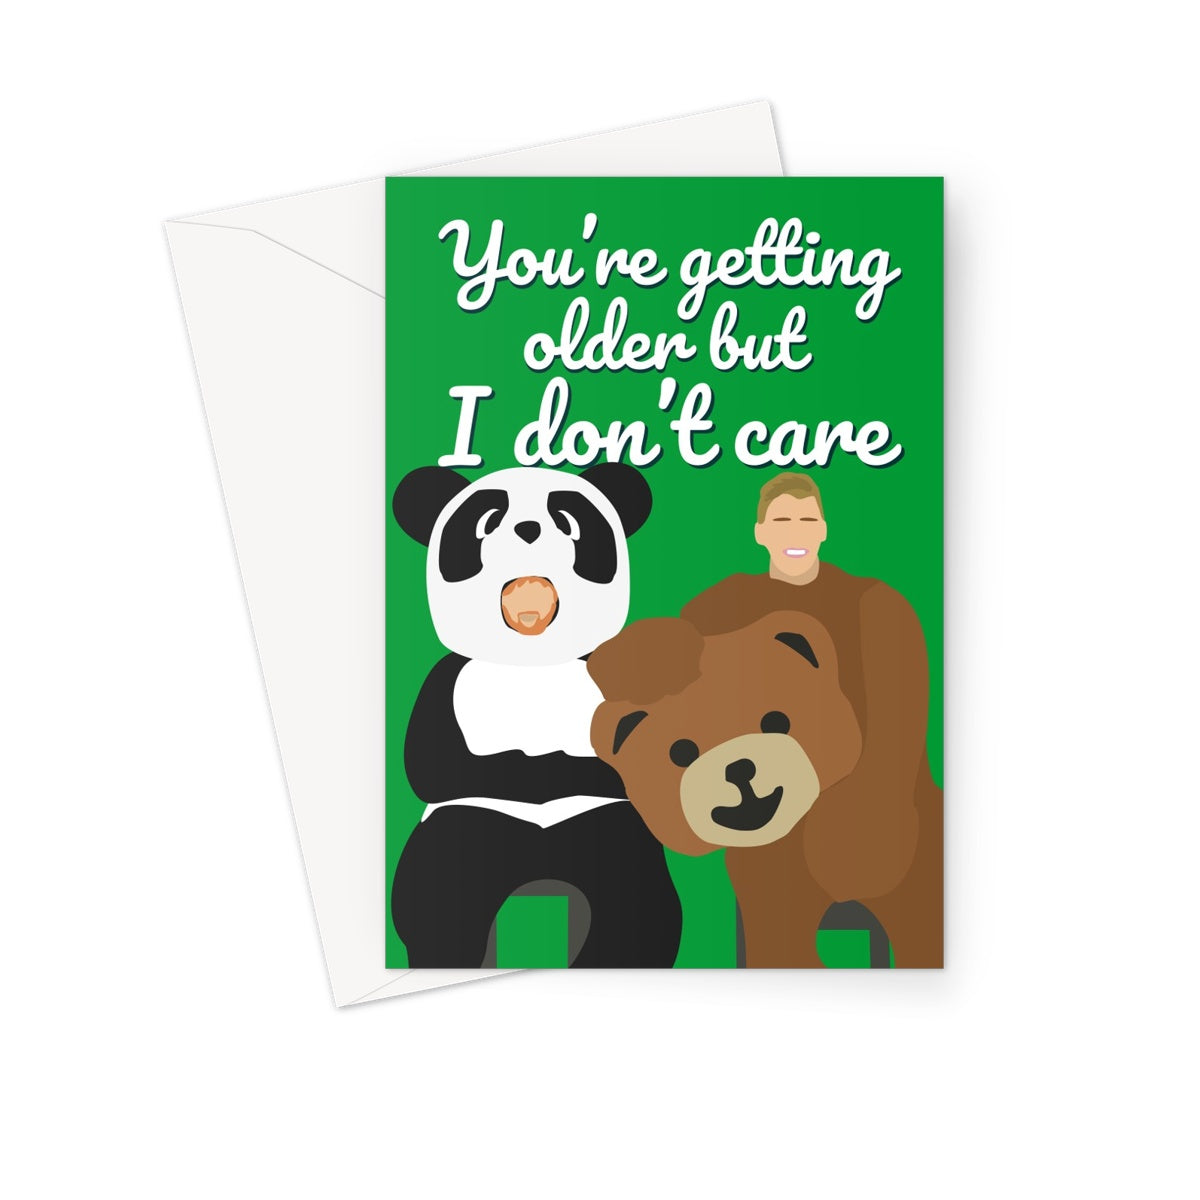 You're getting older but I don't care - Ed Sheeran Justin Bieber Birthday Greeting Card